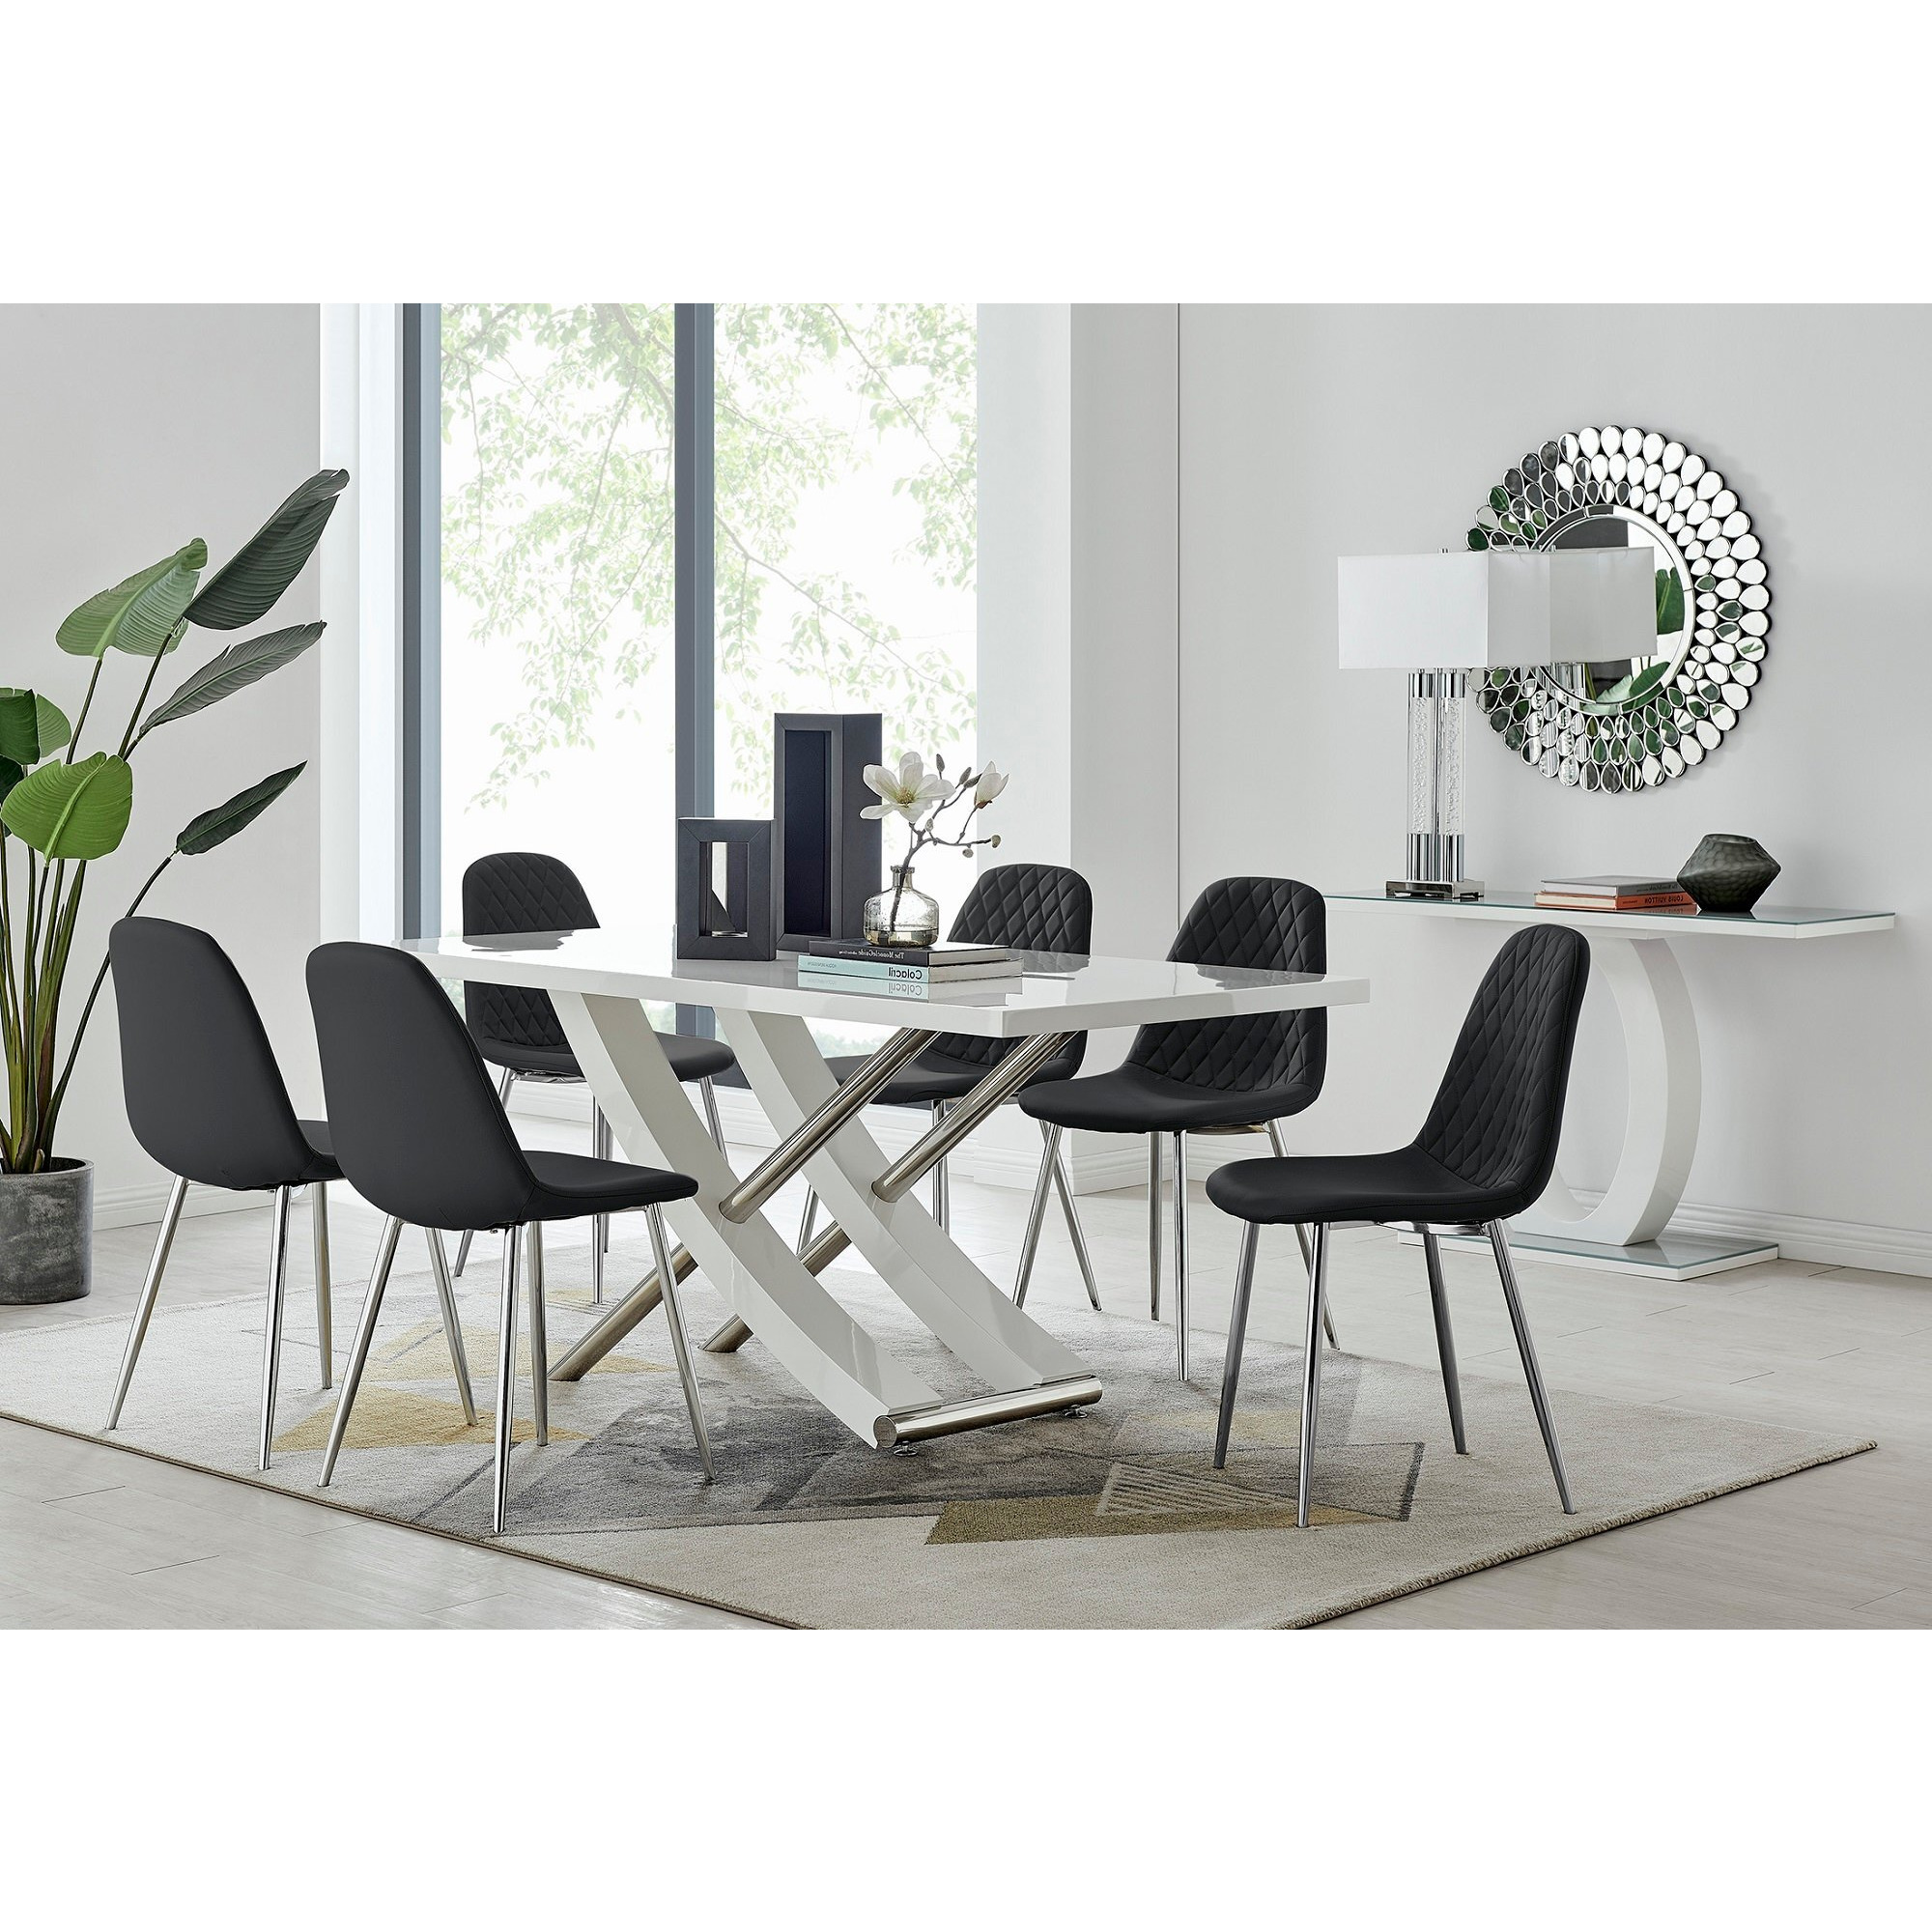 Mayfair 6 Dining Table and 6 Corona Silver Leg Chairs